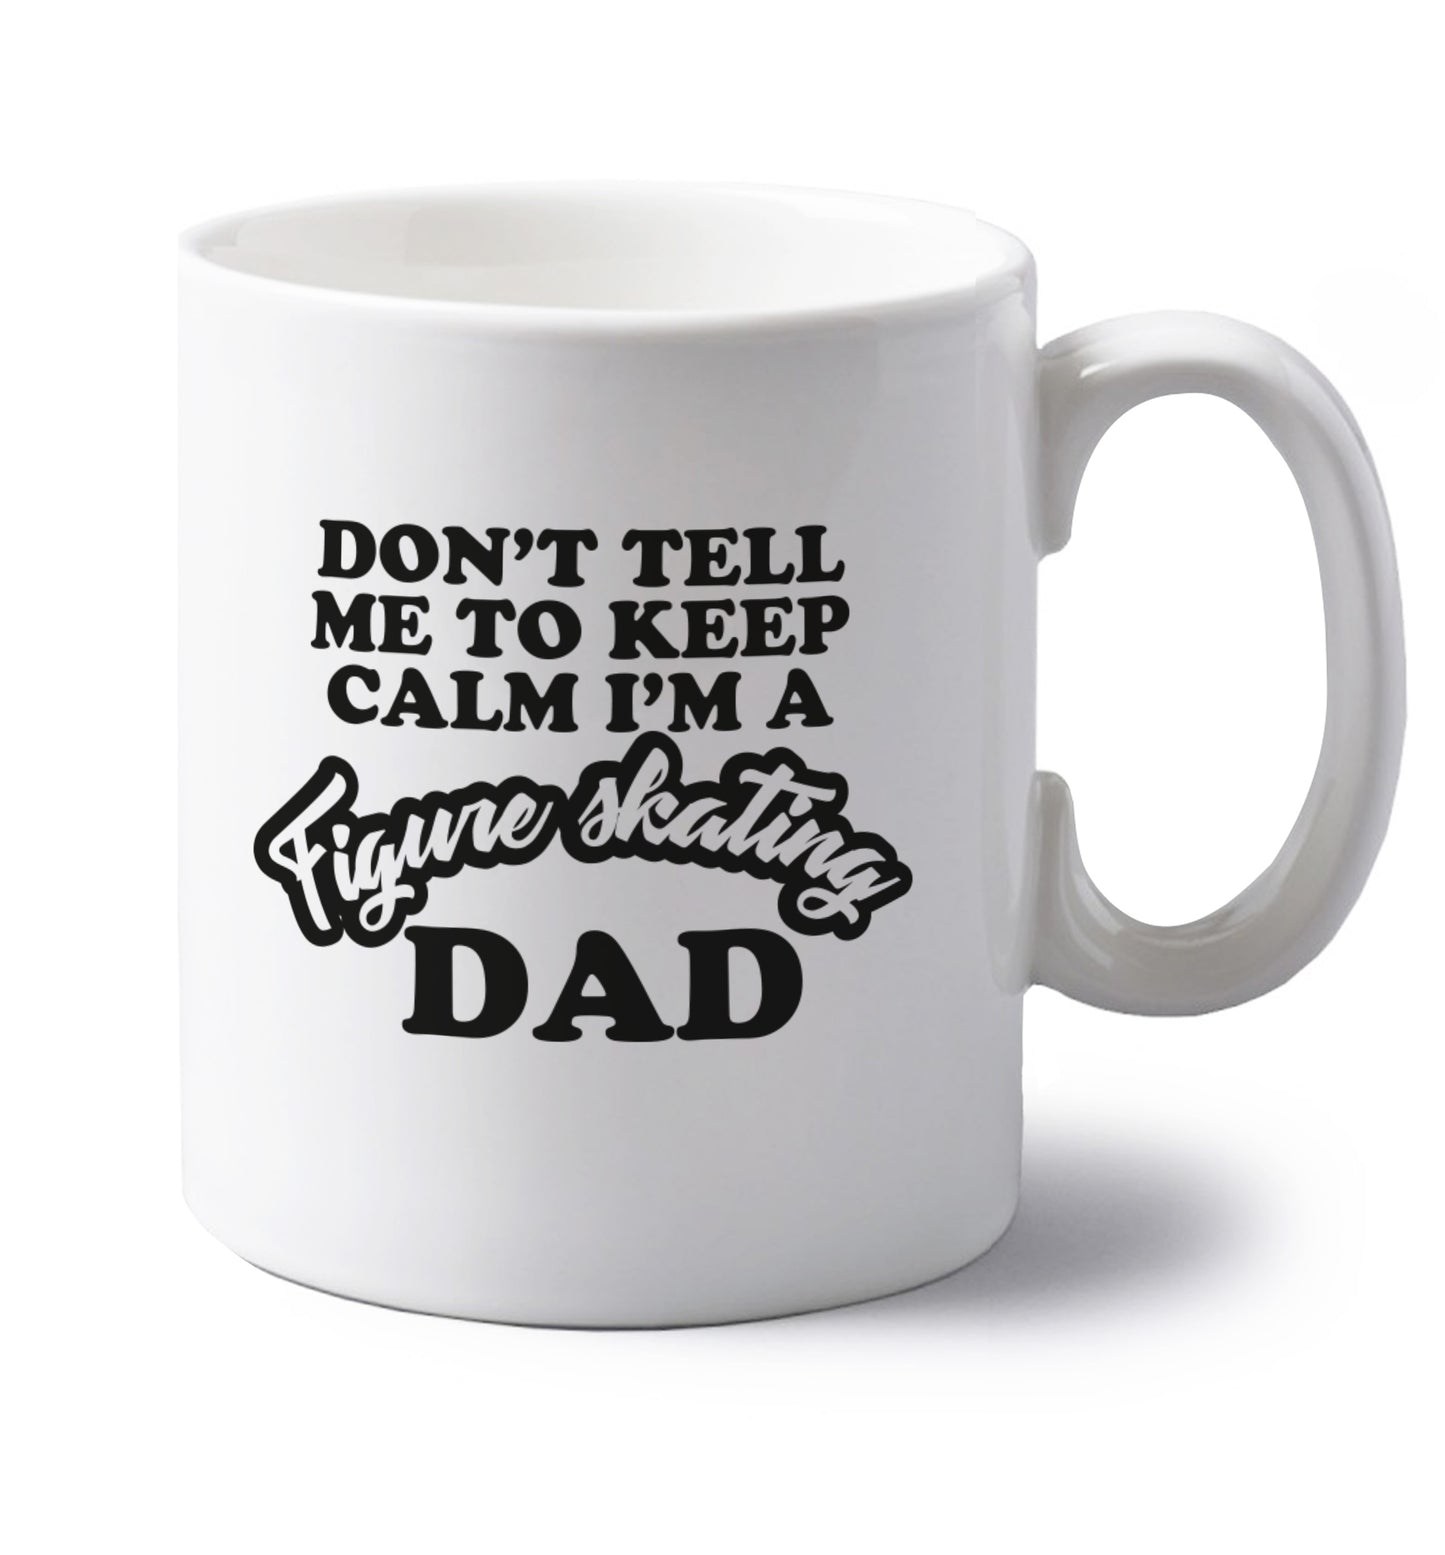 Don't tell me to keep calm I'm a figure skating dad left handed white ceramic mug 